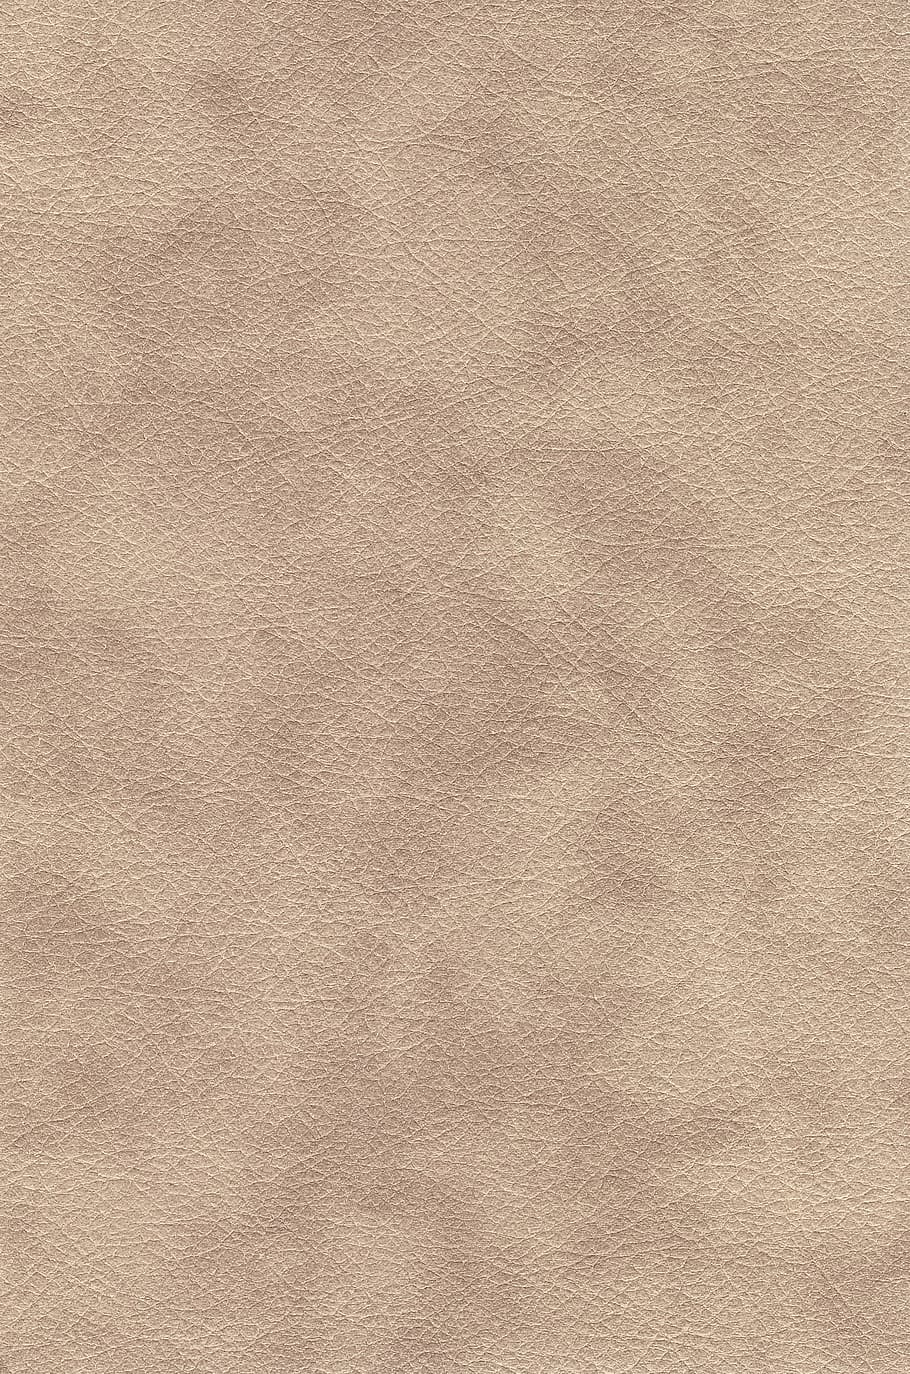 gray carpet, leather, textures, background, fabric, raw, decor, material, pattern, art